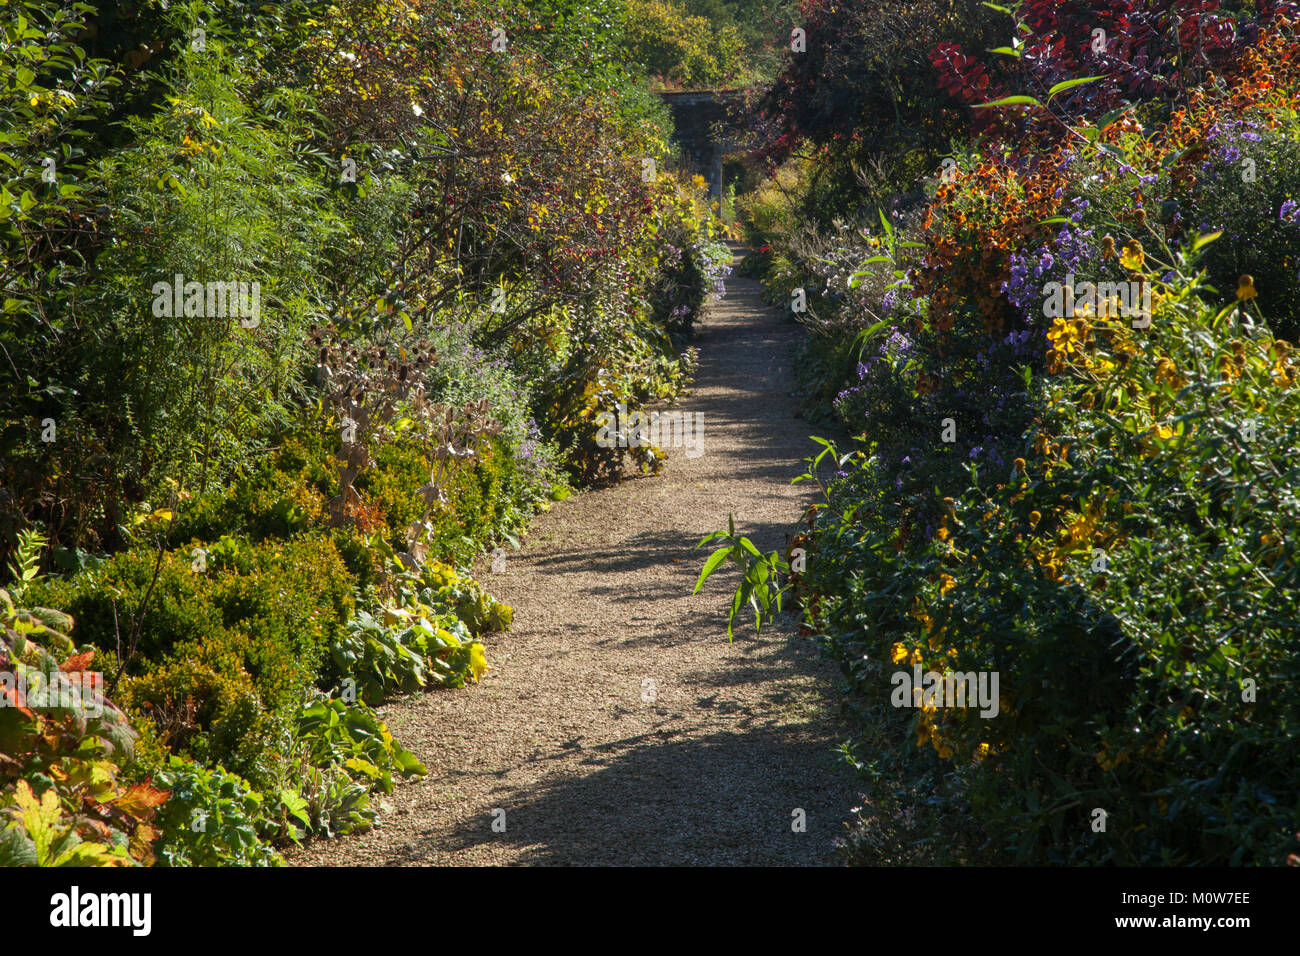 Late September colour within the walled garden of Rousham House in Oxfordshire, England. Stock Photo